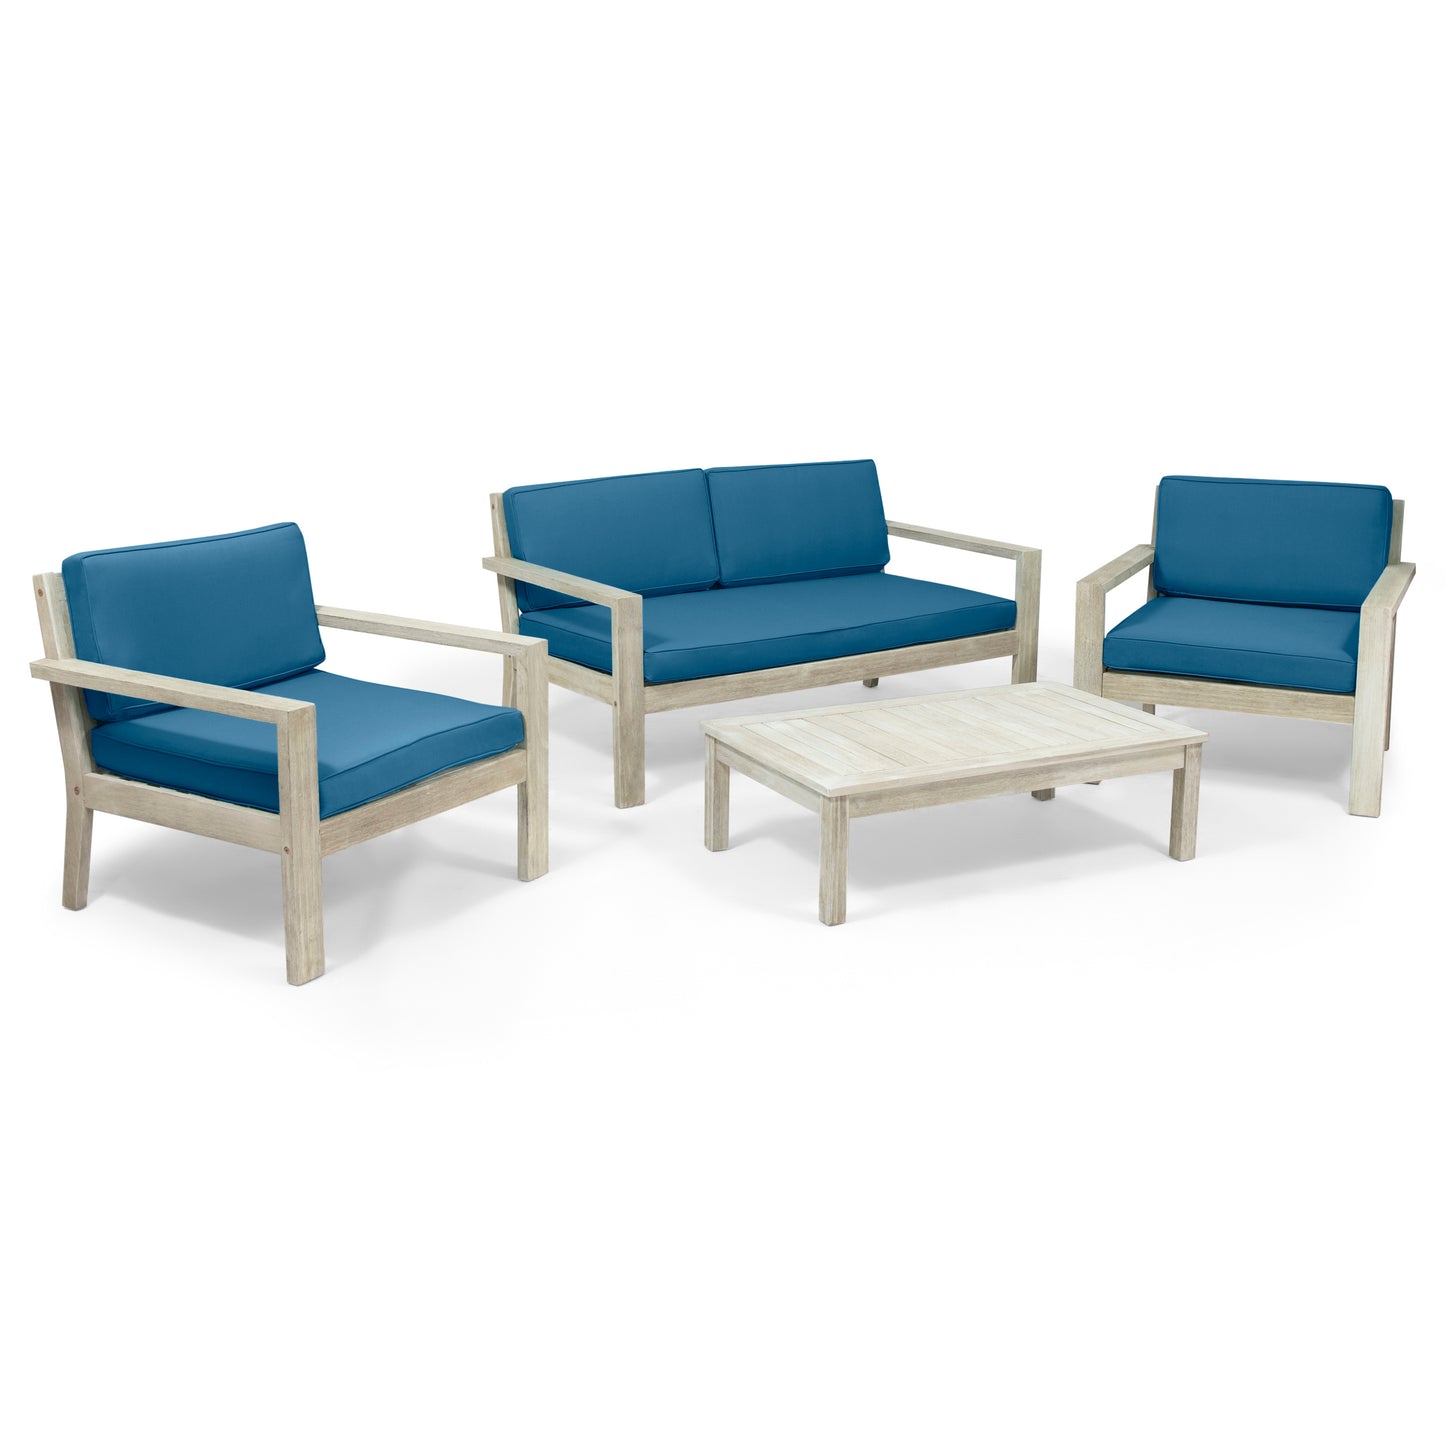 Dominic Outdoor 4 Seater Acacia Wood Chat Set with Cushions